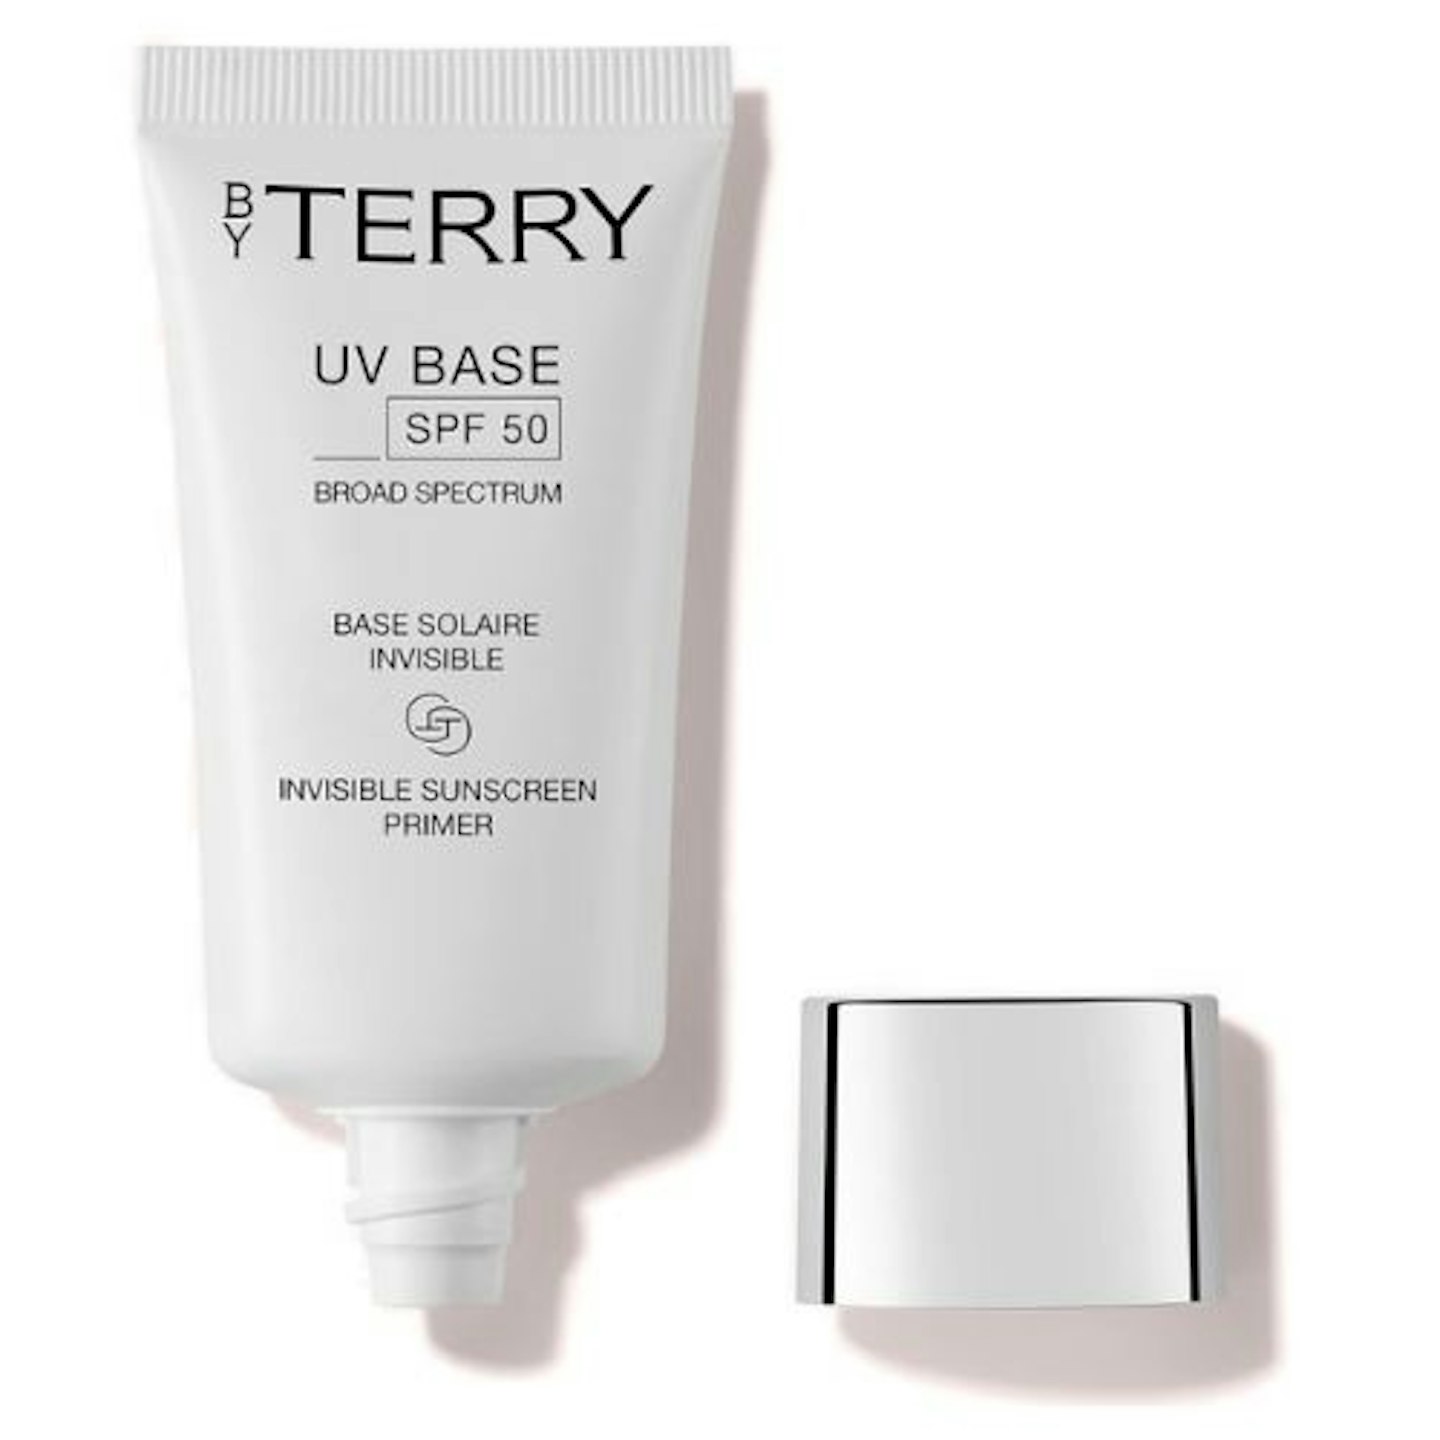 By Terry UV Base Sunscreen Broad Spectrum SPF50